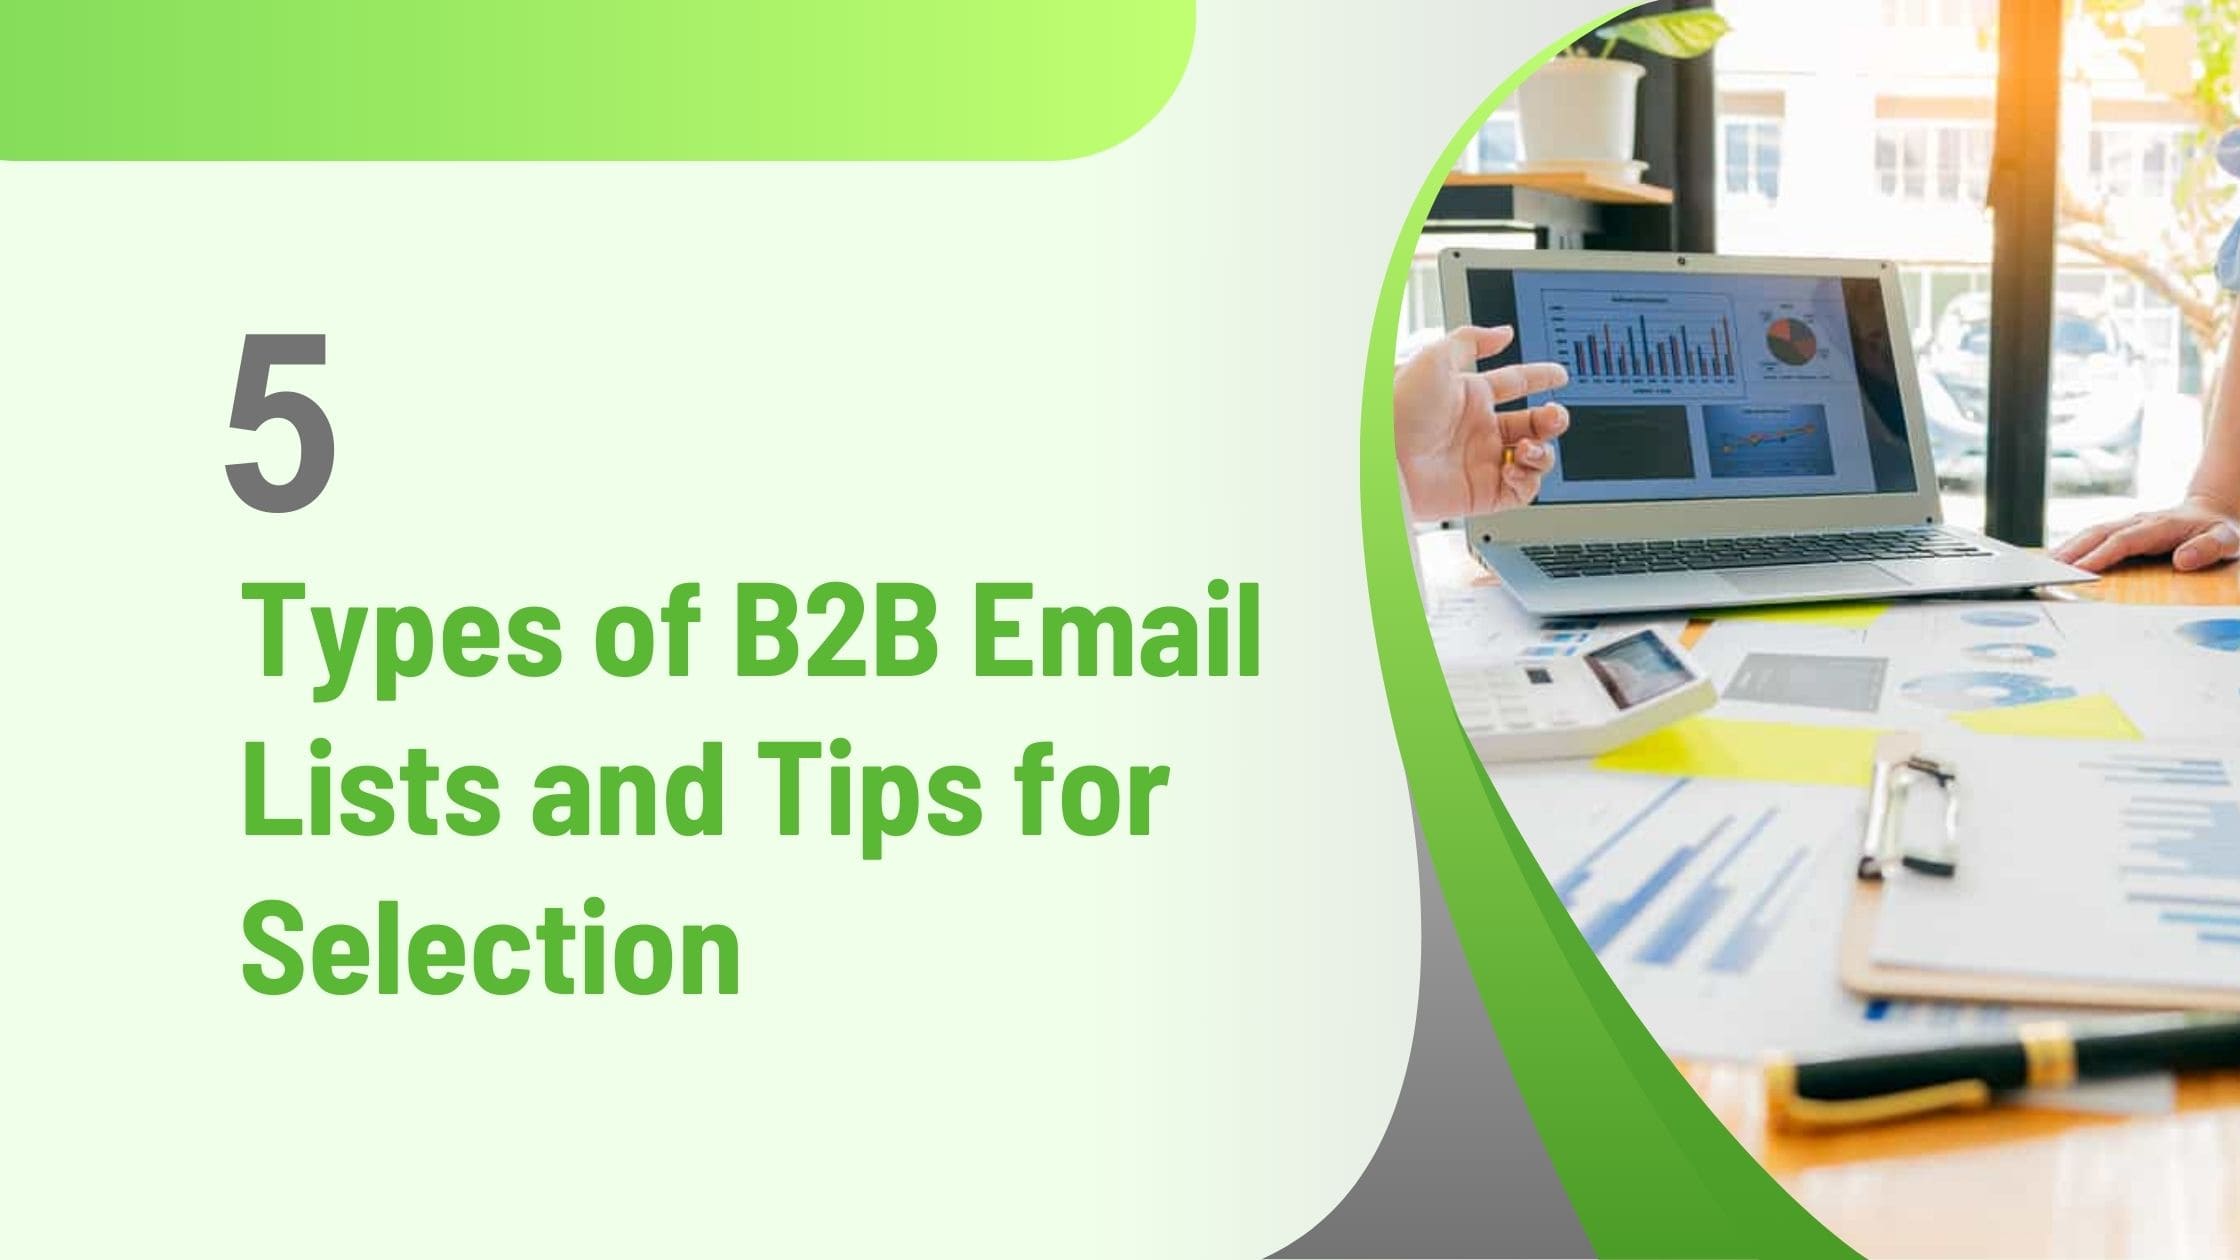 5 Types of B2B Email Lists And Tips for Selection